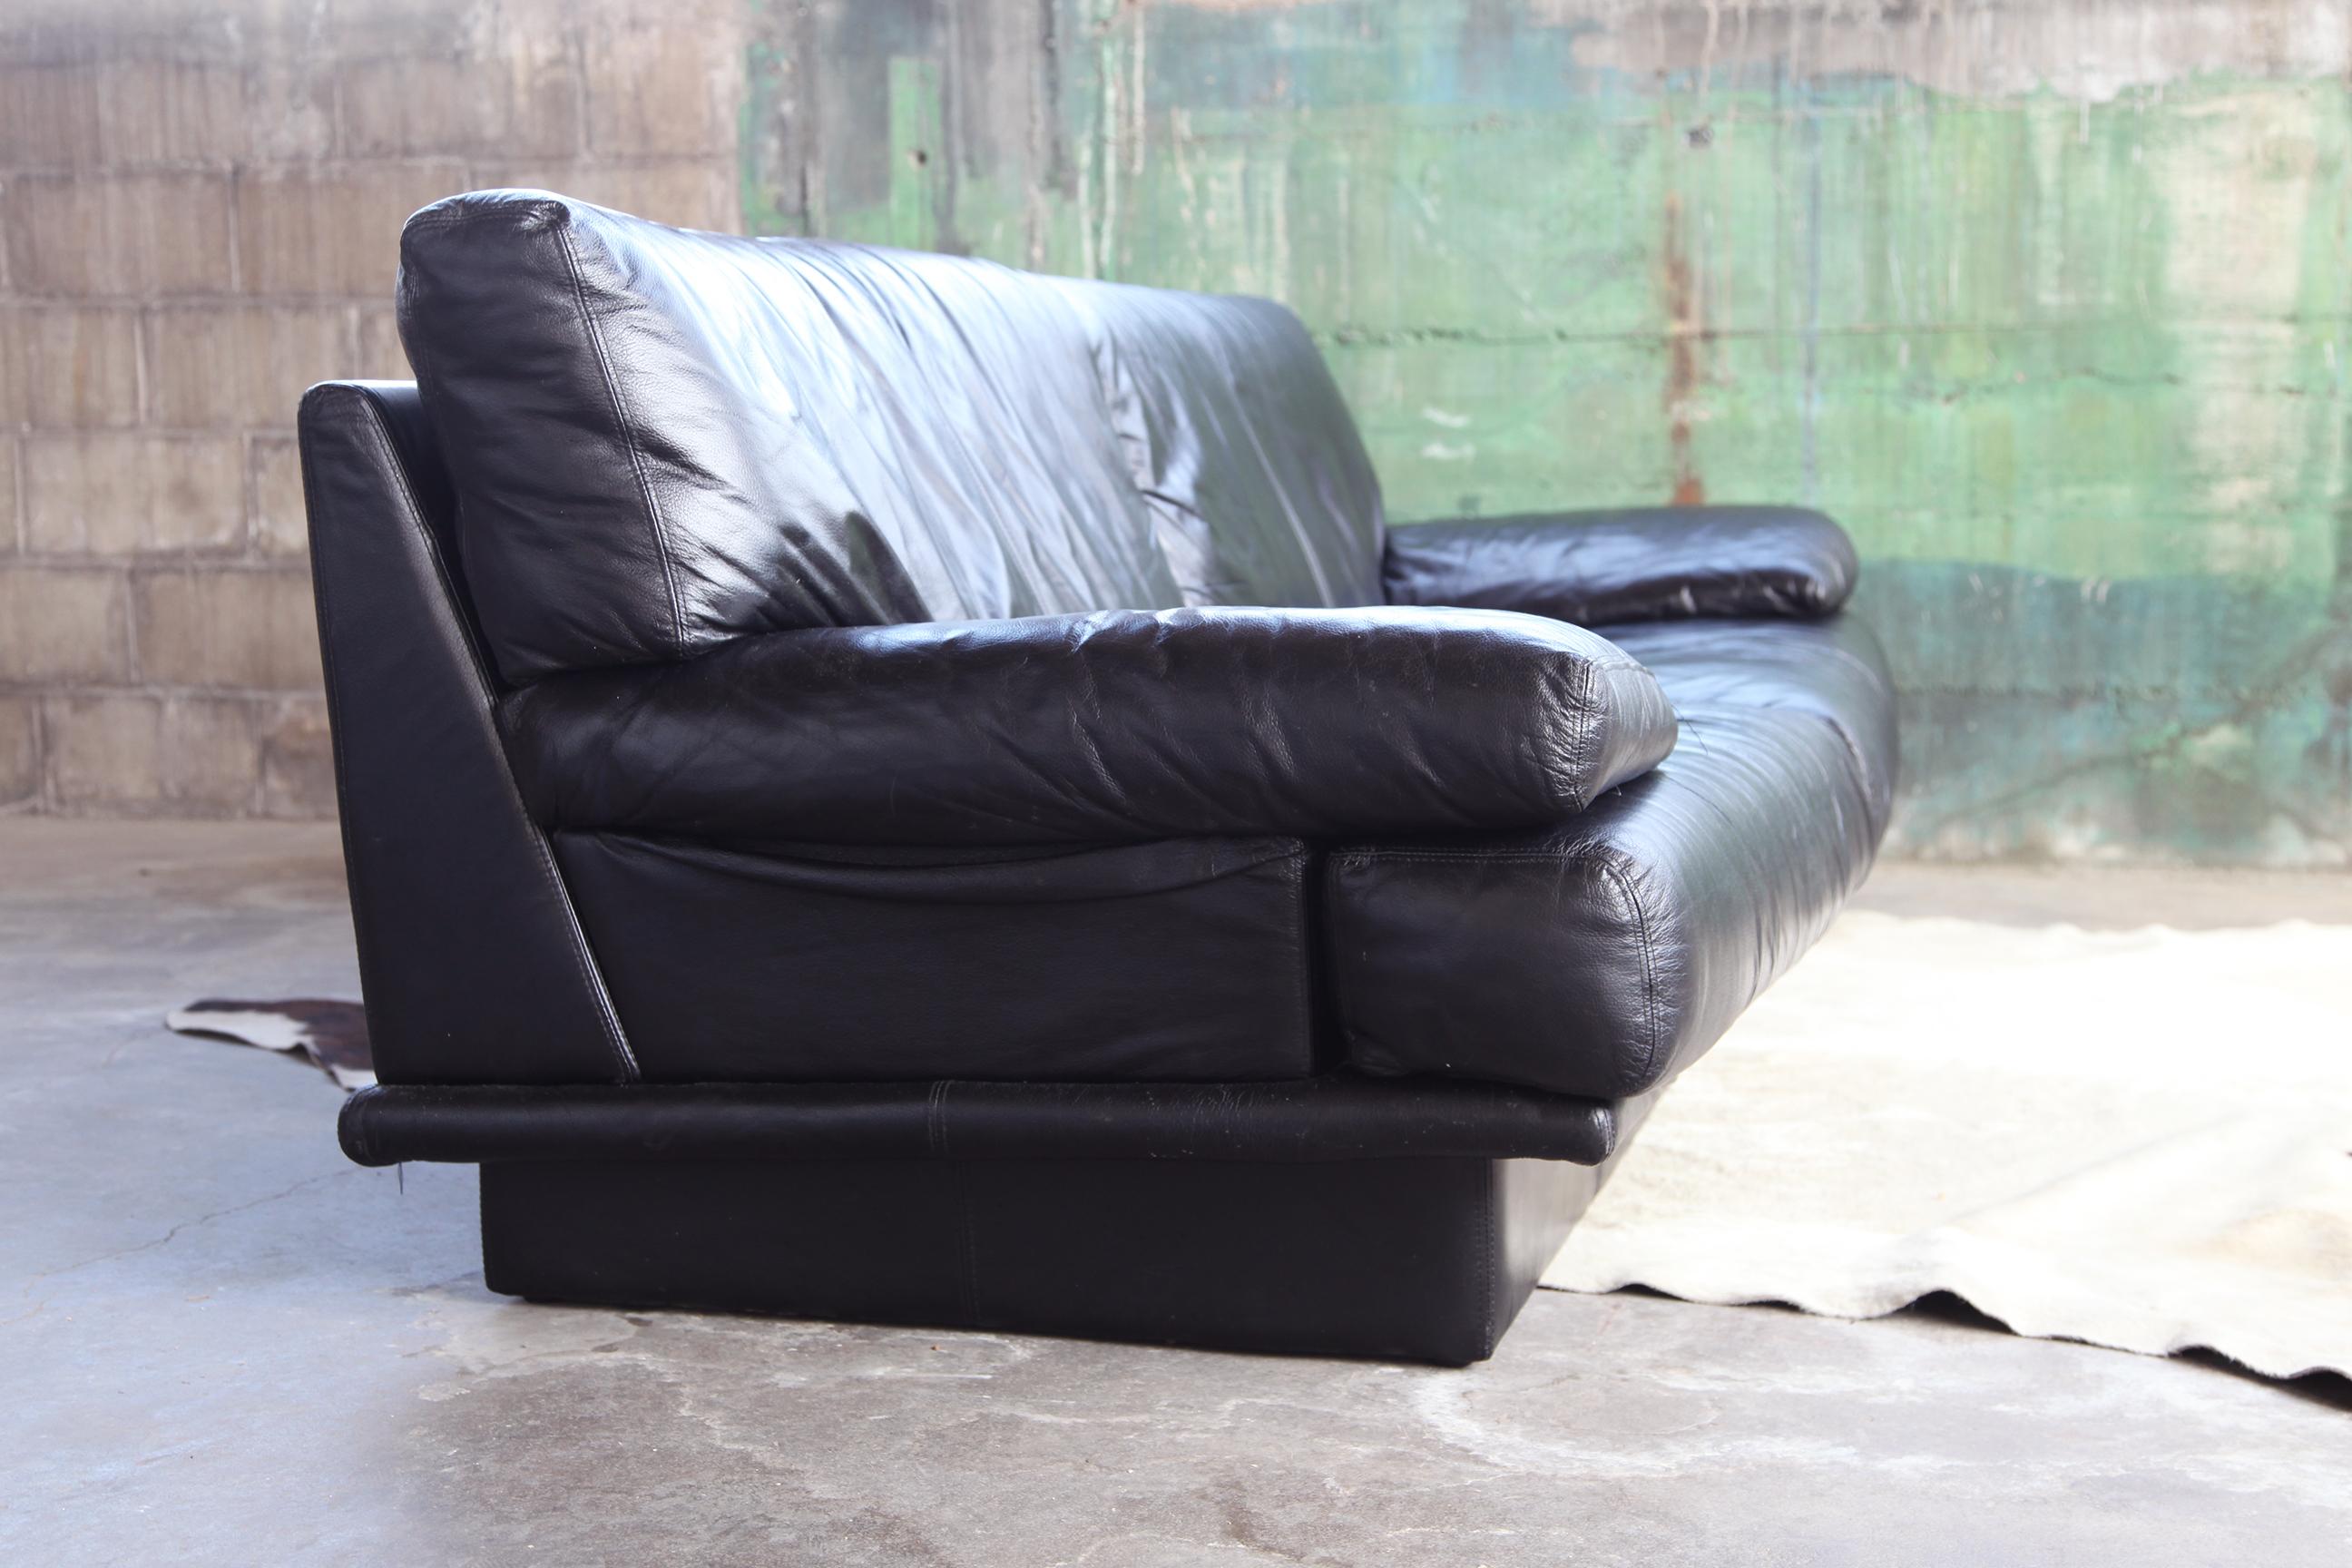 RARE, hard to find PERFECT and very COOL Vintage Postmodern Italian leather plinth base Sofa by designer Nicoletti Salotti, and made in Italy. The label is present.

This is a STUNNING sofa, suited for your on point, stylish, cutting edge setting.